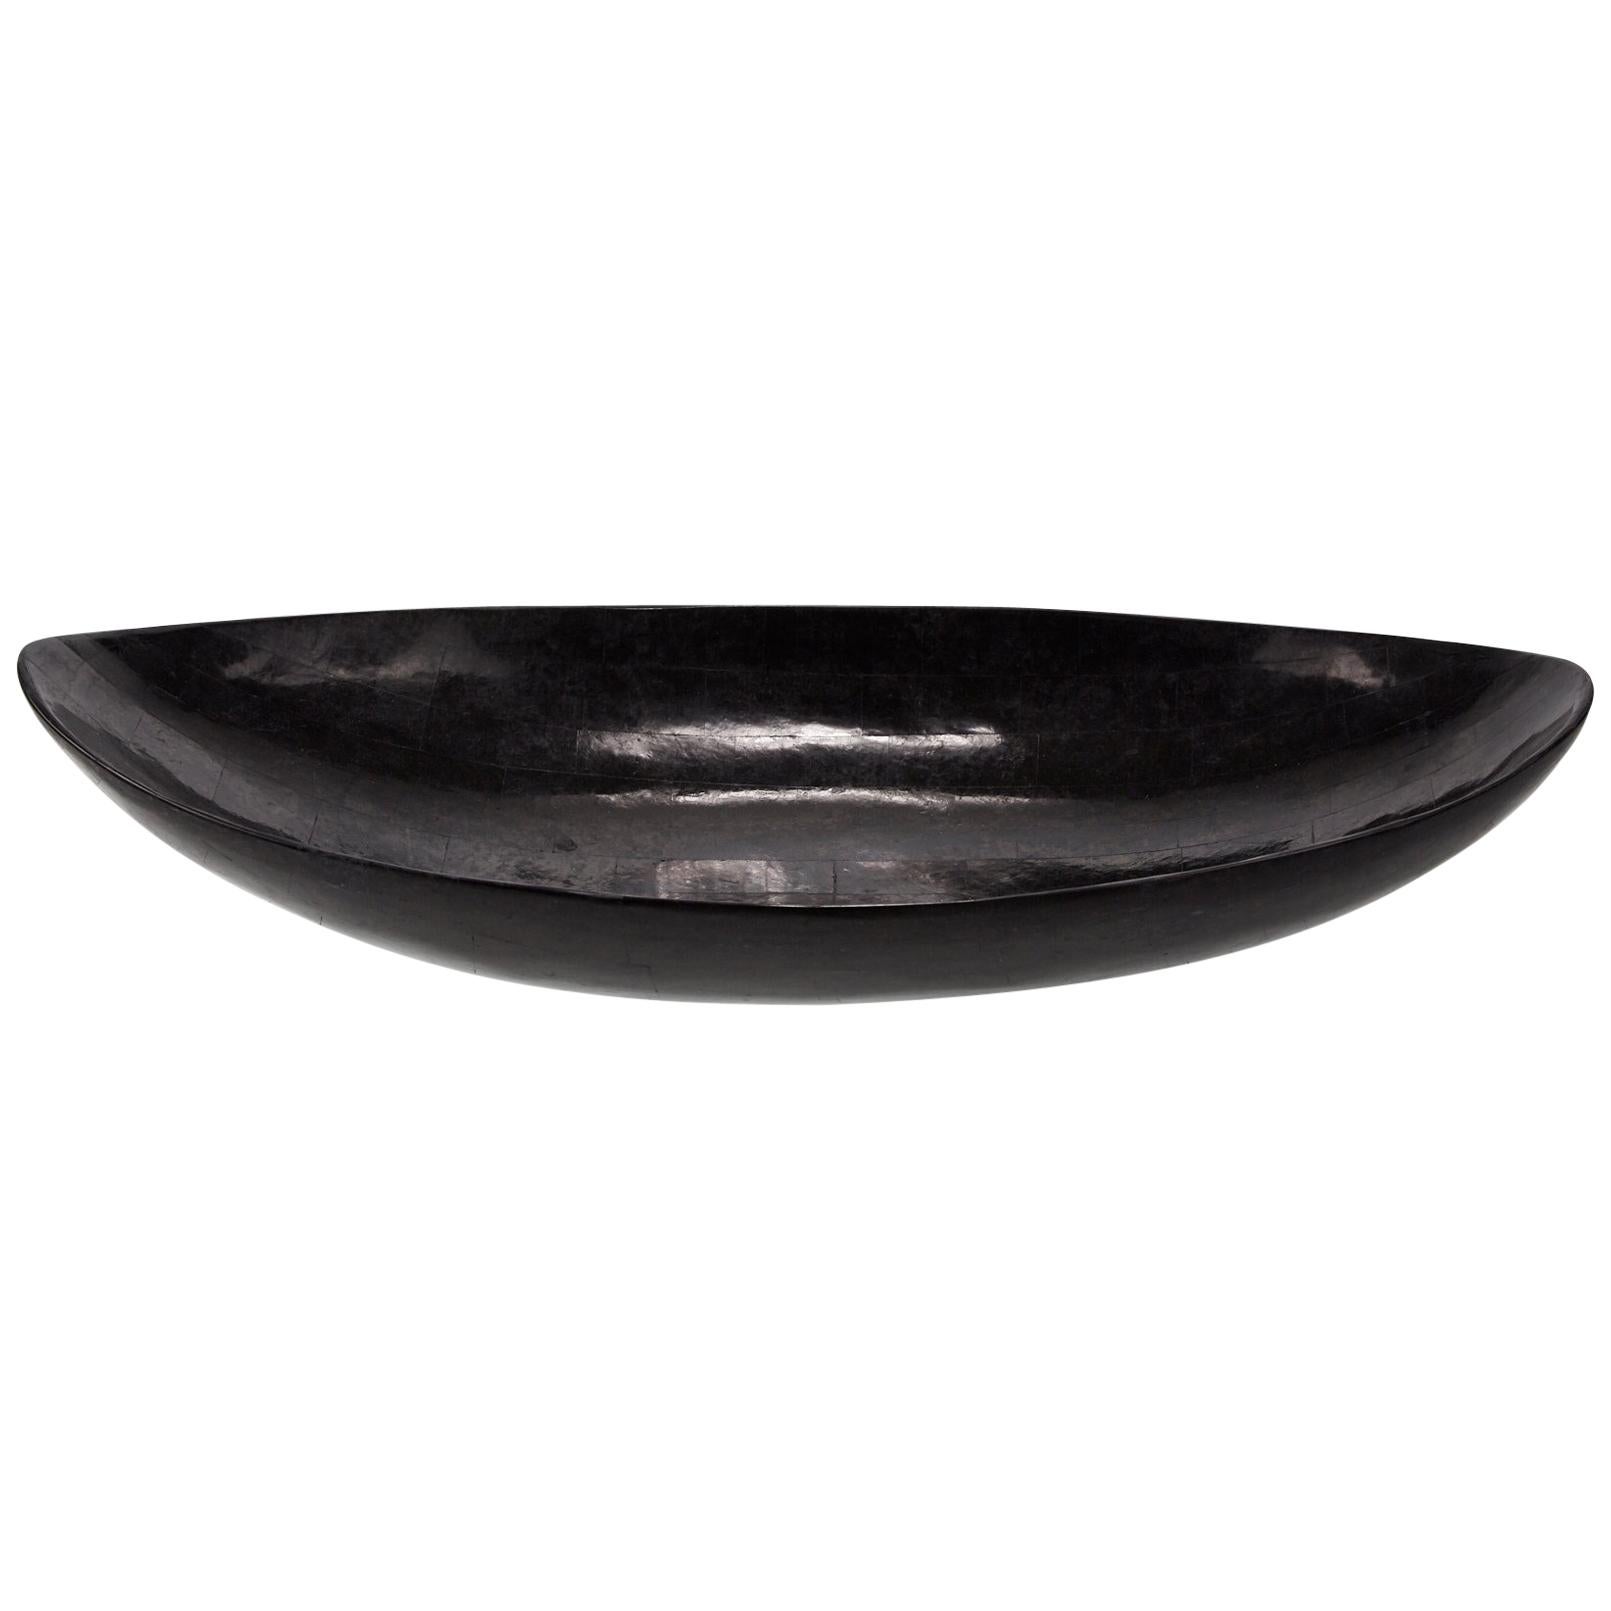 Postmodern Black Tessellated Stone Oval Decorative Bowl or Platter, 1990s For Sale